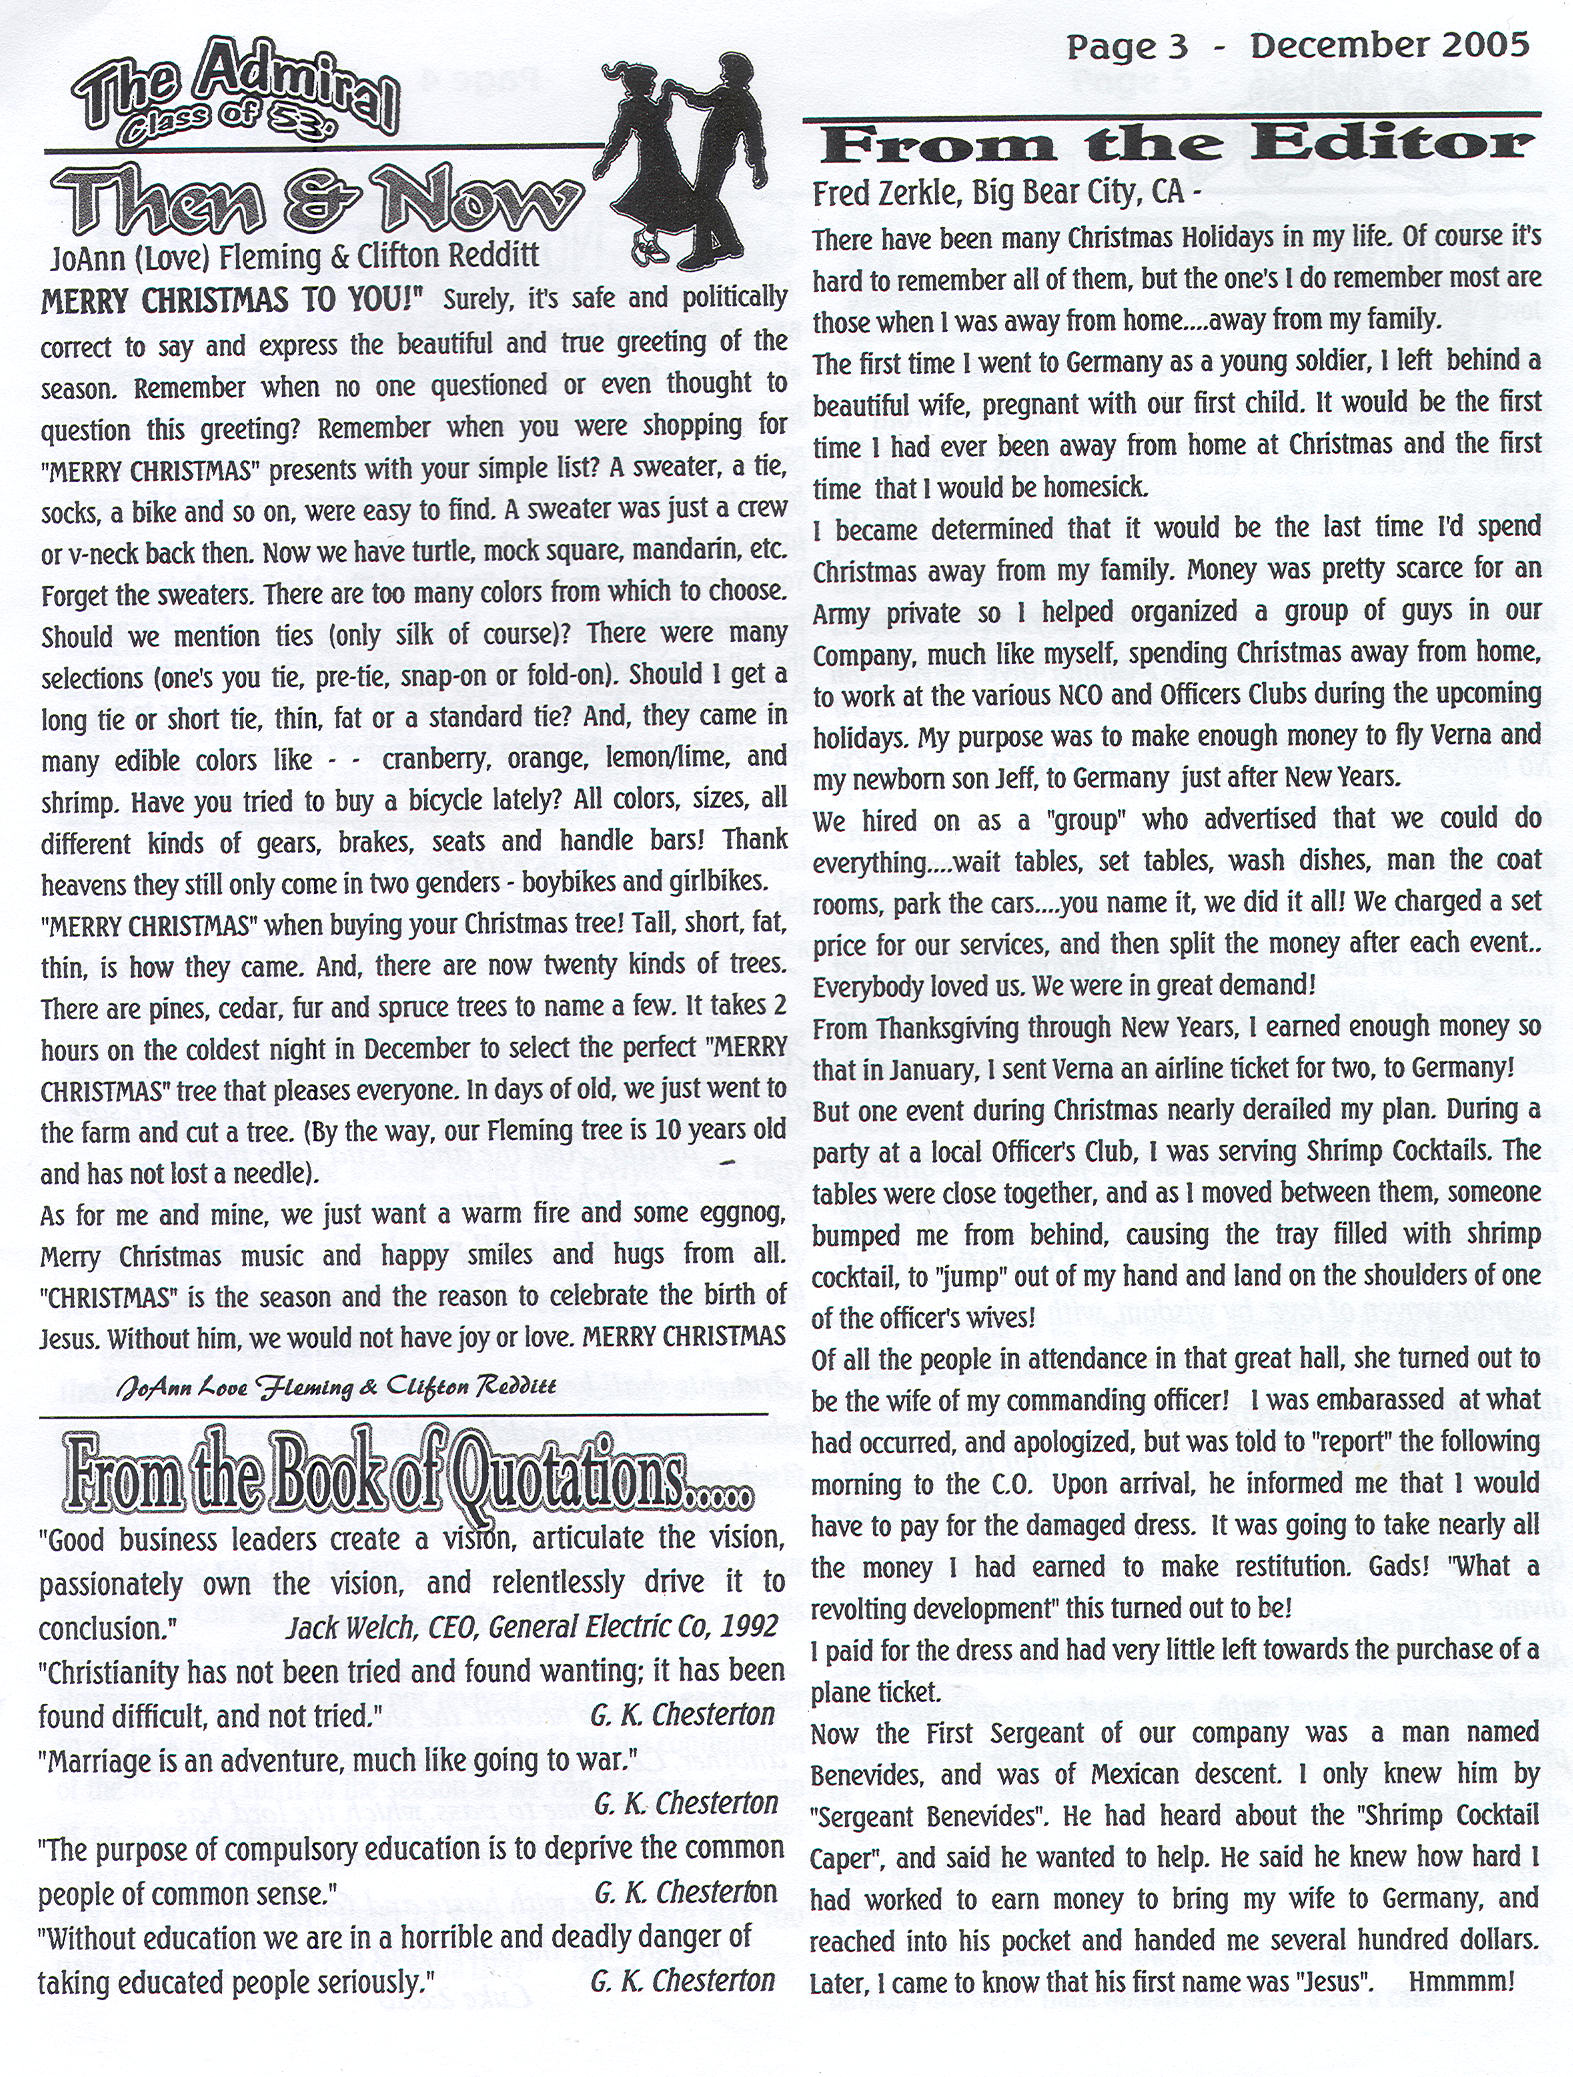 The Admiral - December 2005 - pg. 3